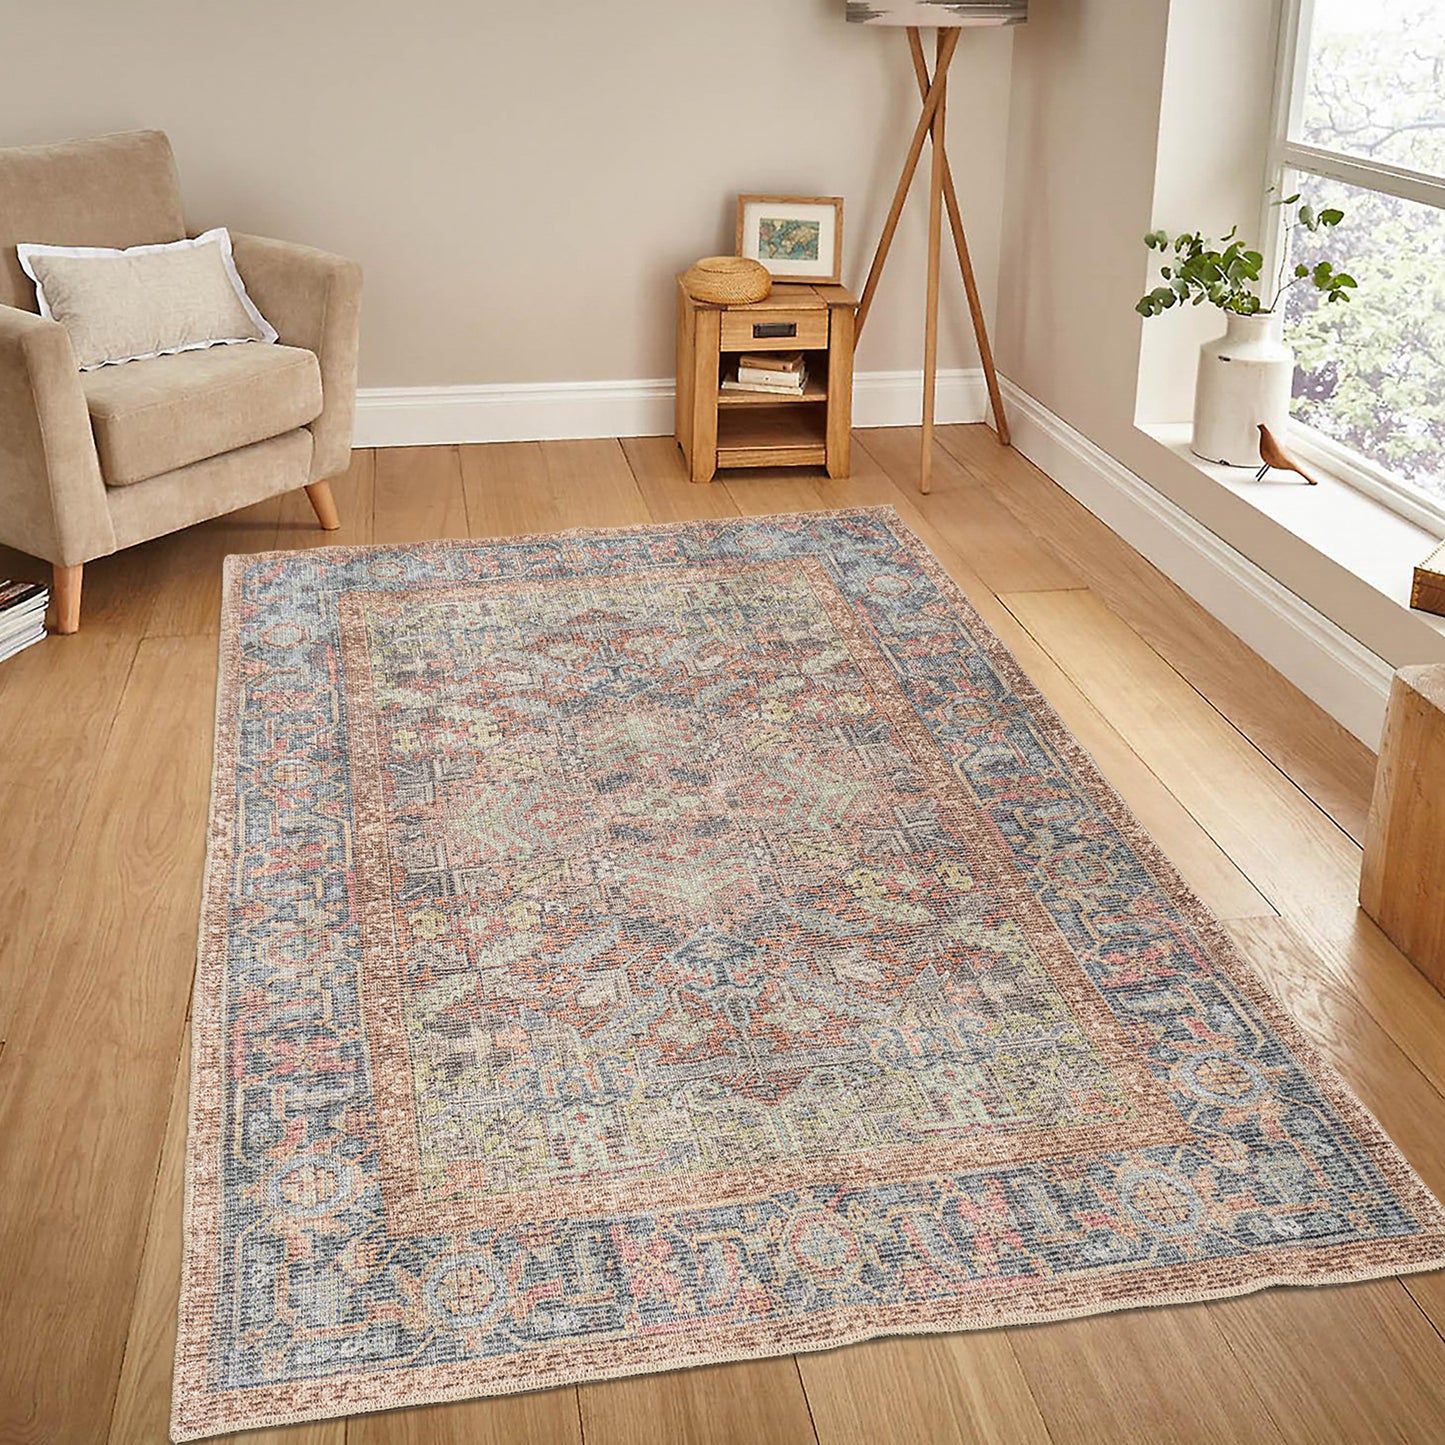 multicolor bordered cotton and polyster machine washable traditional rustic area rug 5x7, 5x8 ft Contemporary, Living Room Carpet, Bedroom, Home Office